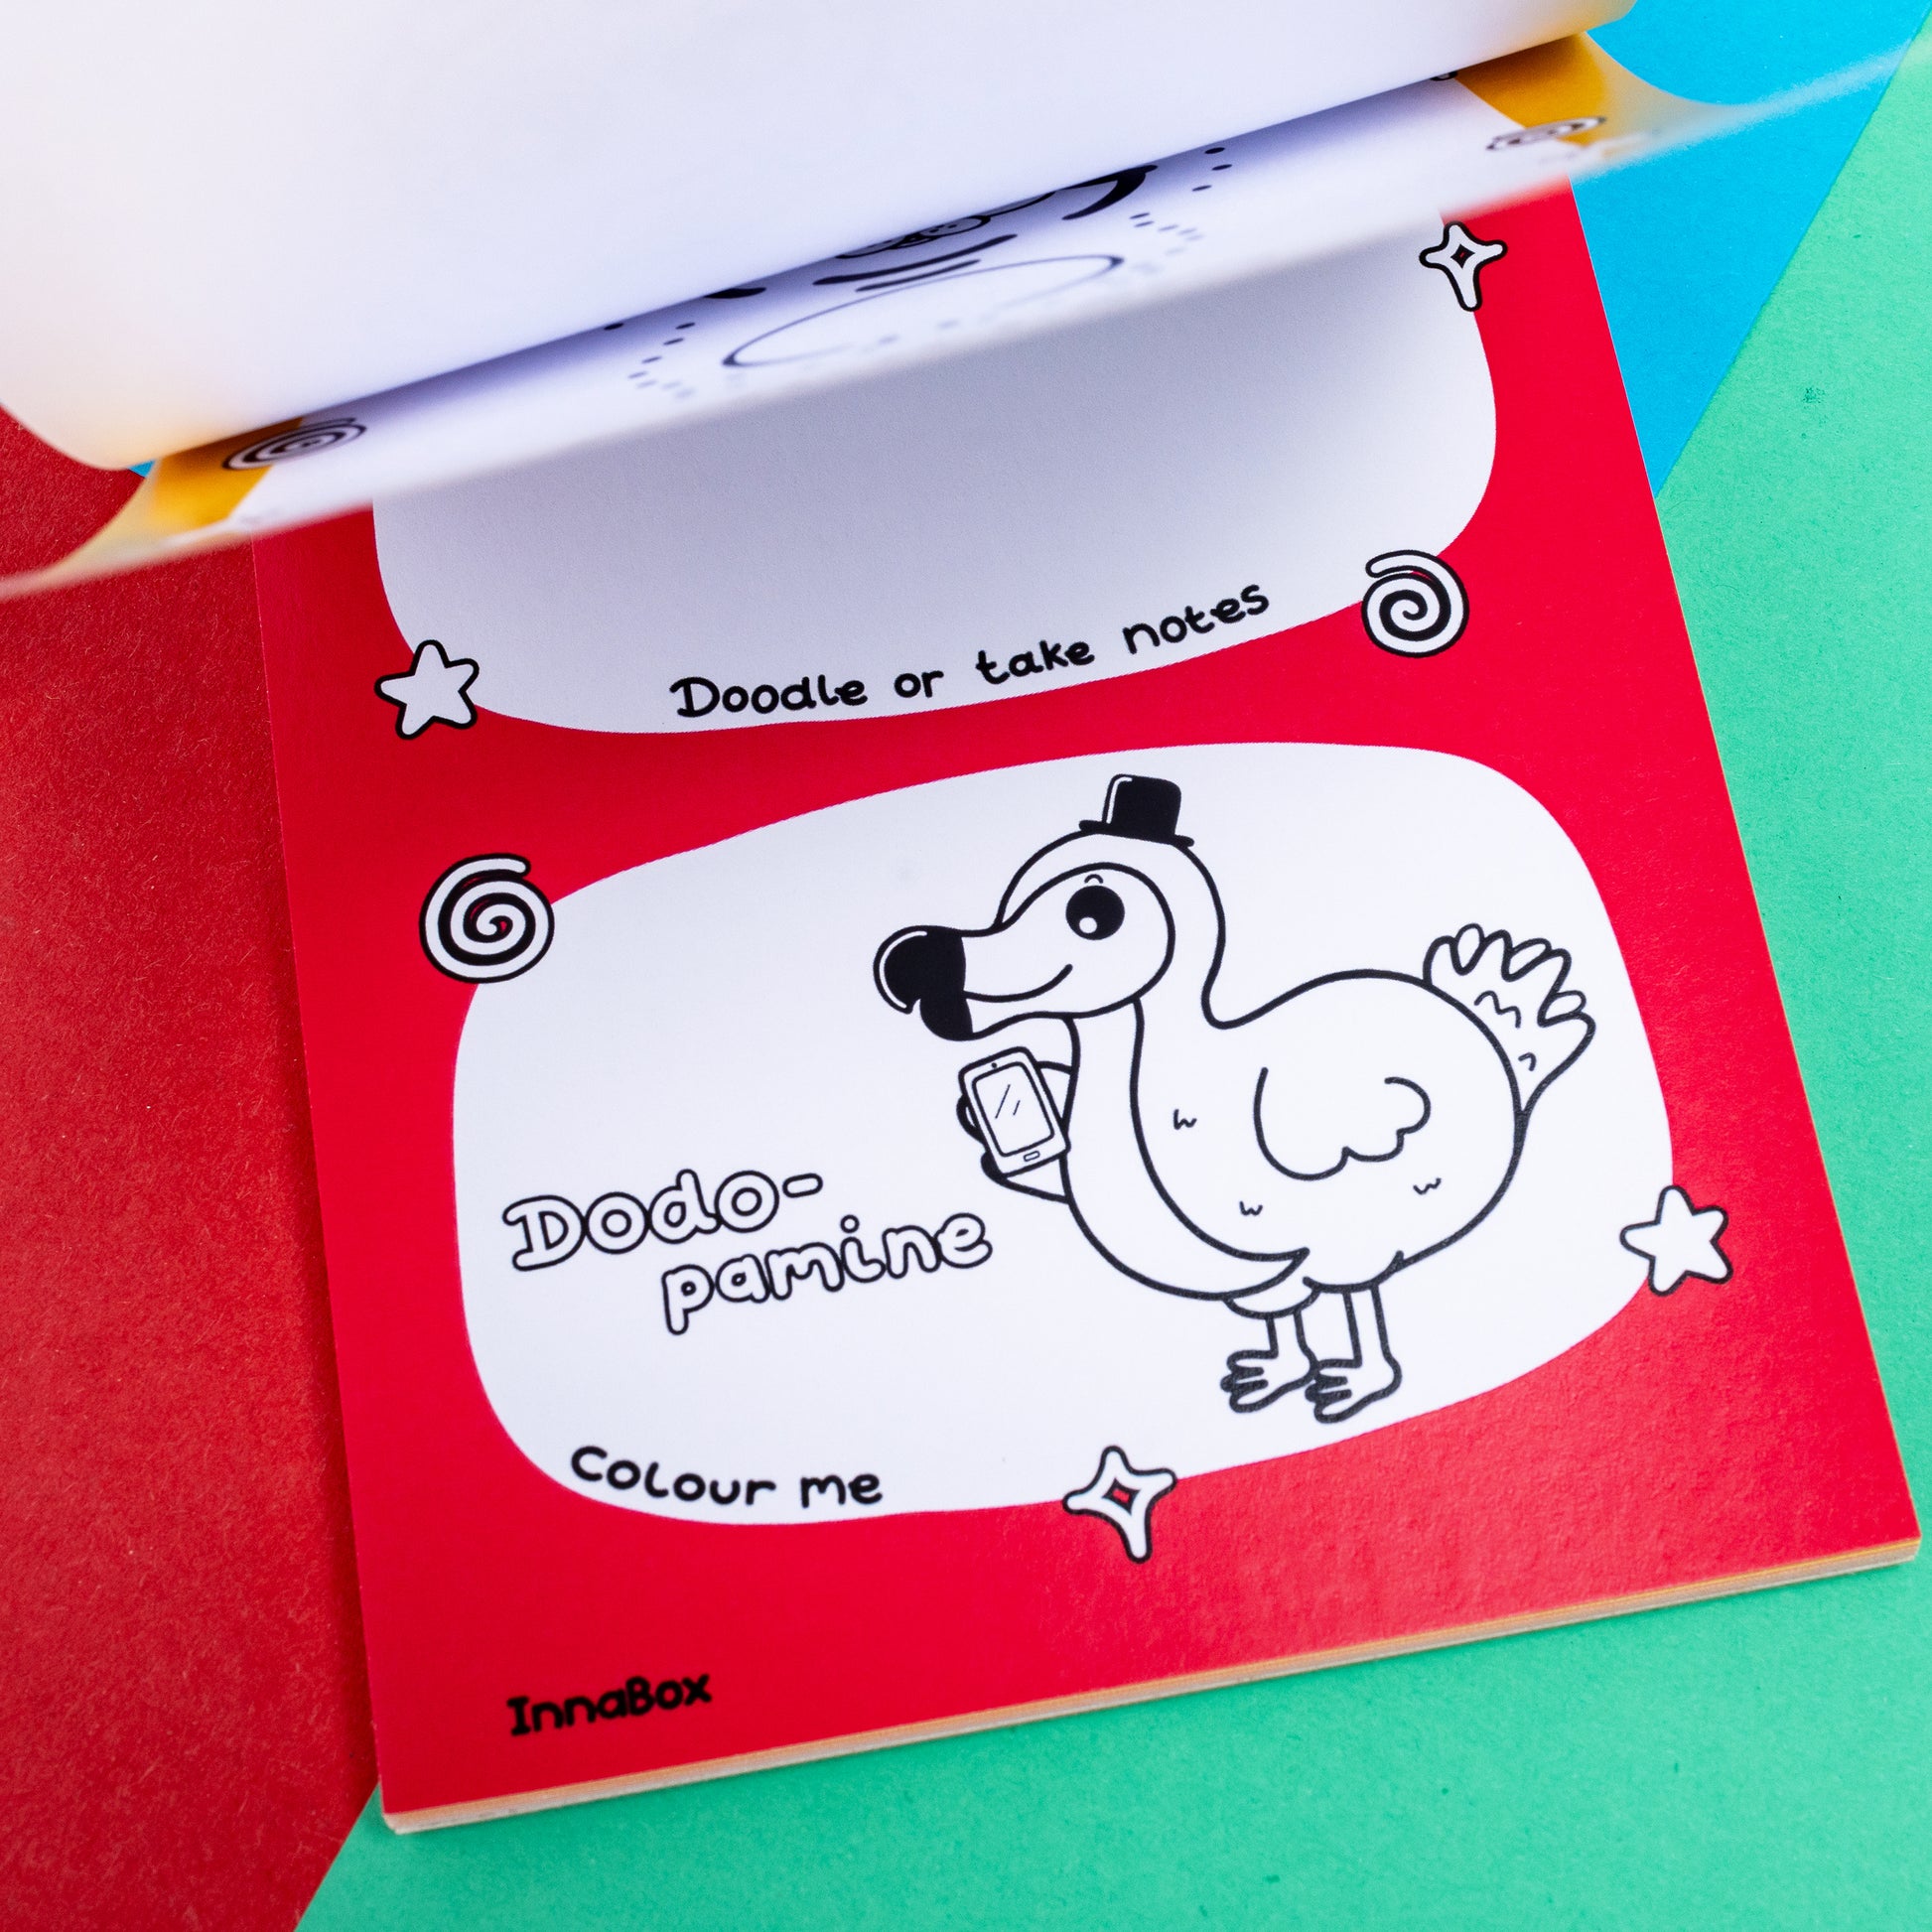 A page of a red outlined notebook with the words 'Dodo-pamine' with a Dodo drawing next to it with a phone and a top hat. The words 'Doodle or take notes' above it and below it 'colour me' it is on a red, green and blue background 